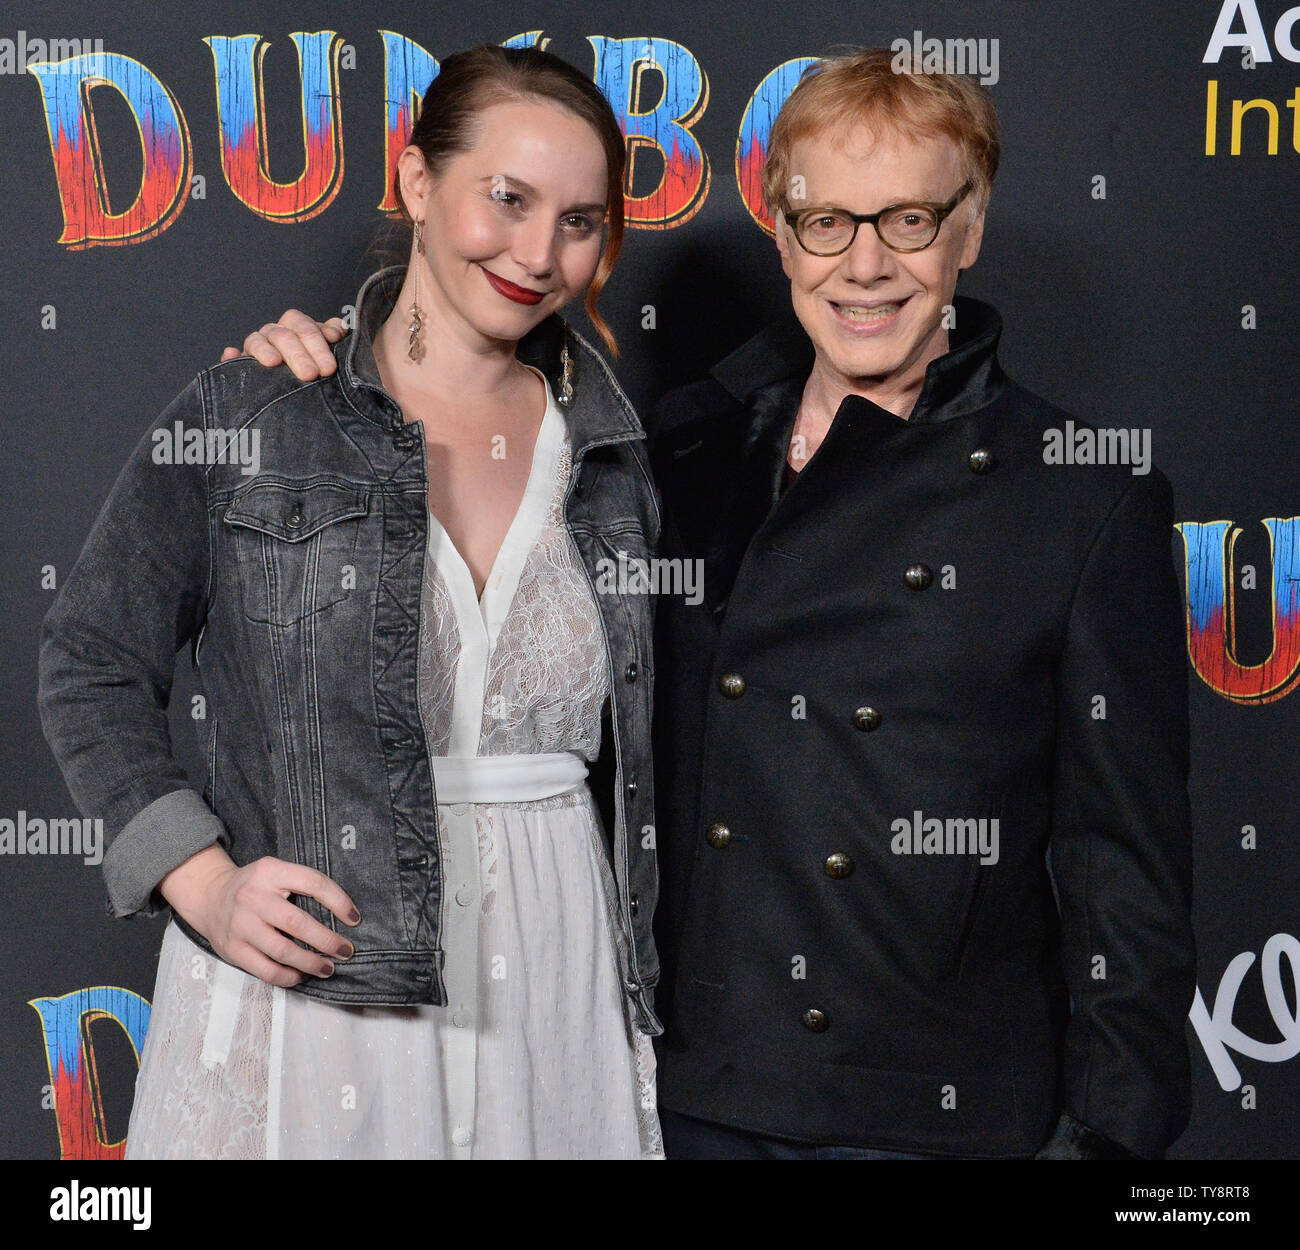 American composer and songwriter Danny Elfman and his wife Mali Elfman attend the premiere of the motion picture fantasy "Dumbo" at the Ray Dolby Ballroom, Loews Hollywood Hotel in the Hollywood section of Los Angeles on March 11, 2019. Storyline: A young elephant, whose oversized ears enable him to fly, helps save a struggling circus, but when the circus plans a new venture, Dumbo and his friends discover dark secrets beneath its shiny veneer.  Photo by Jim Ruymen/UPI Stock Photo